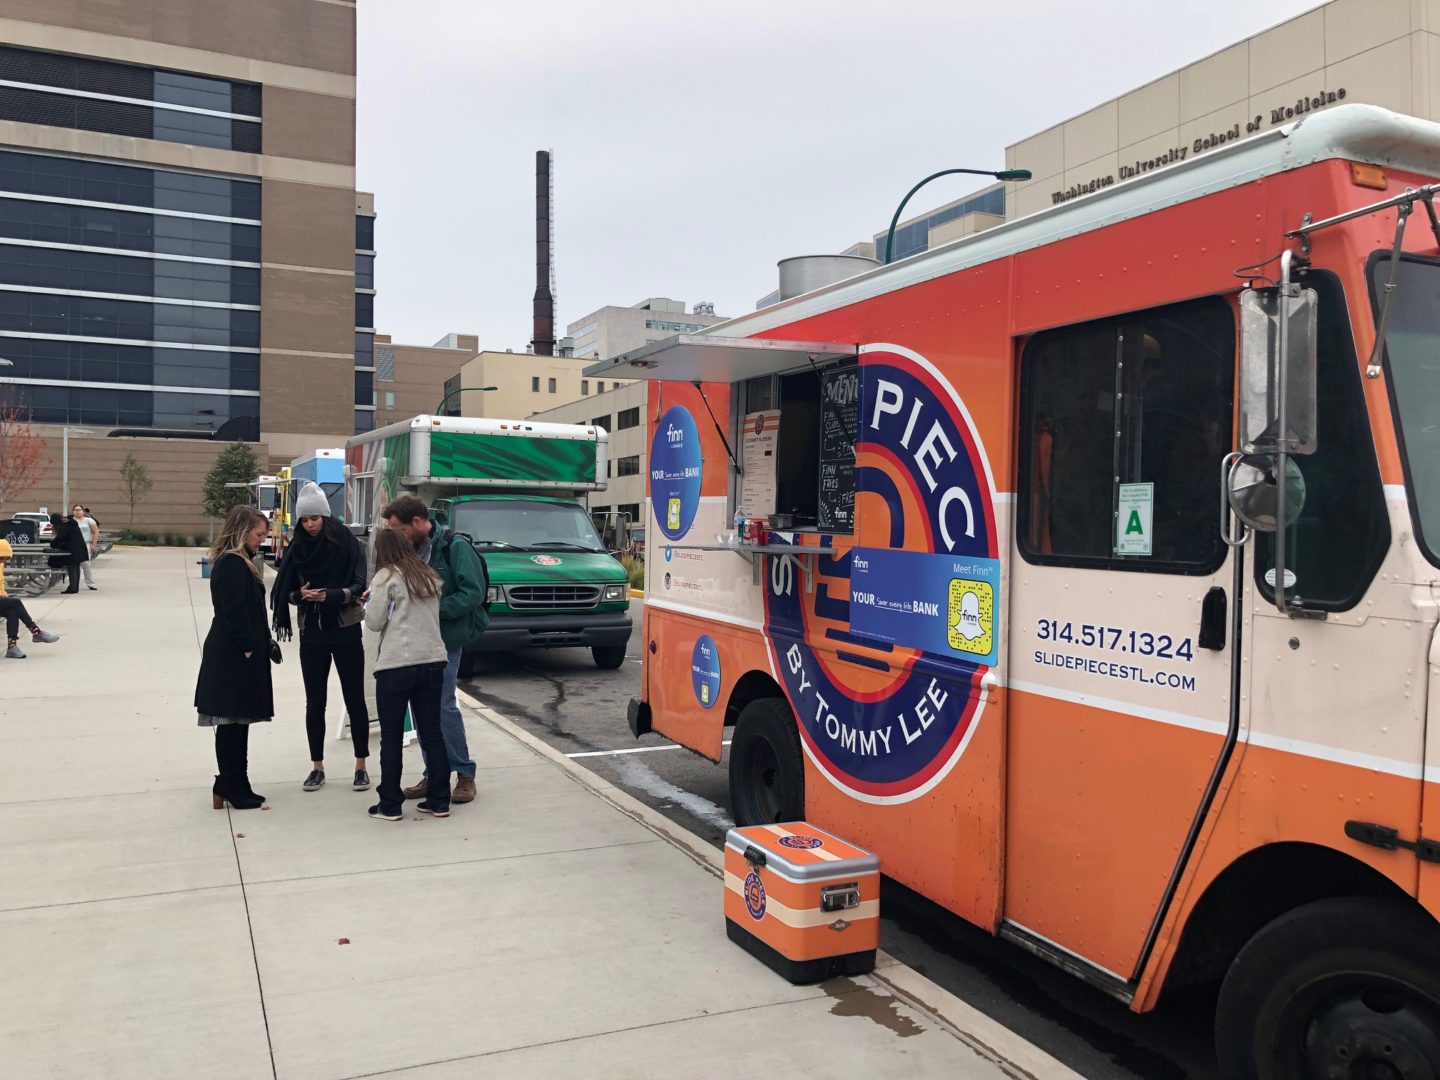 Finn by Chase Launches in St. Louis with Free ‘Food with Finn’ Events